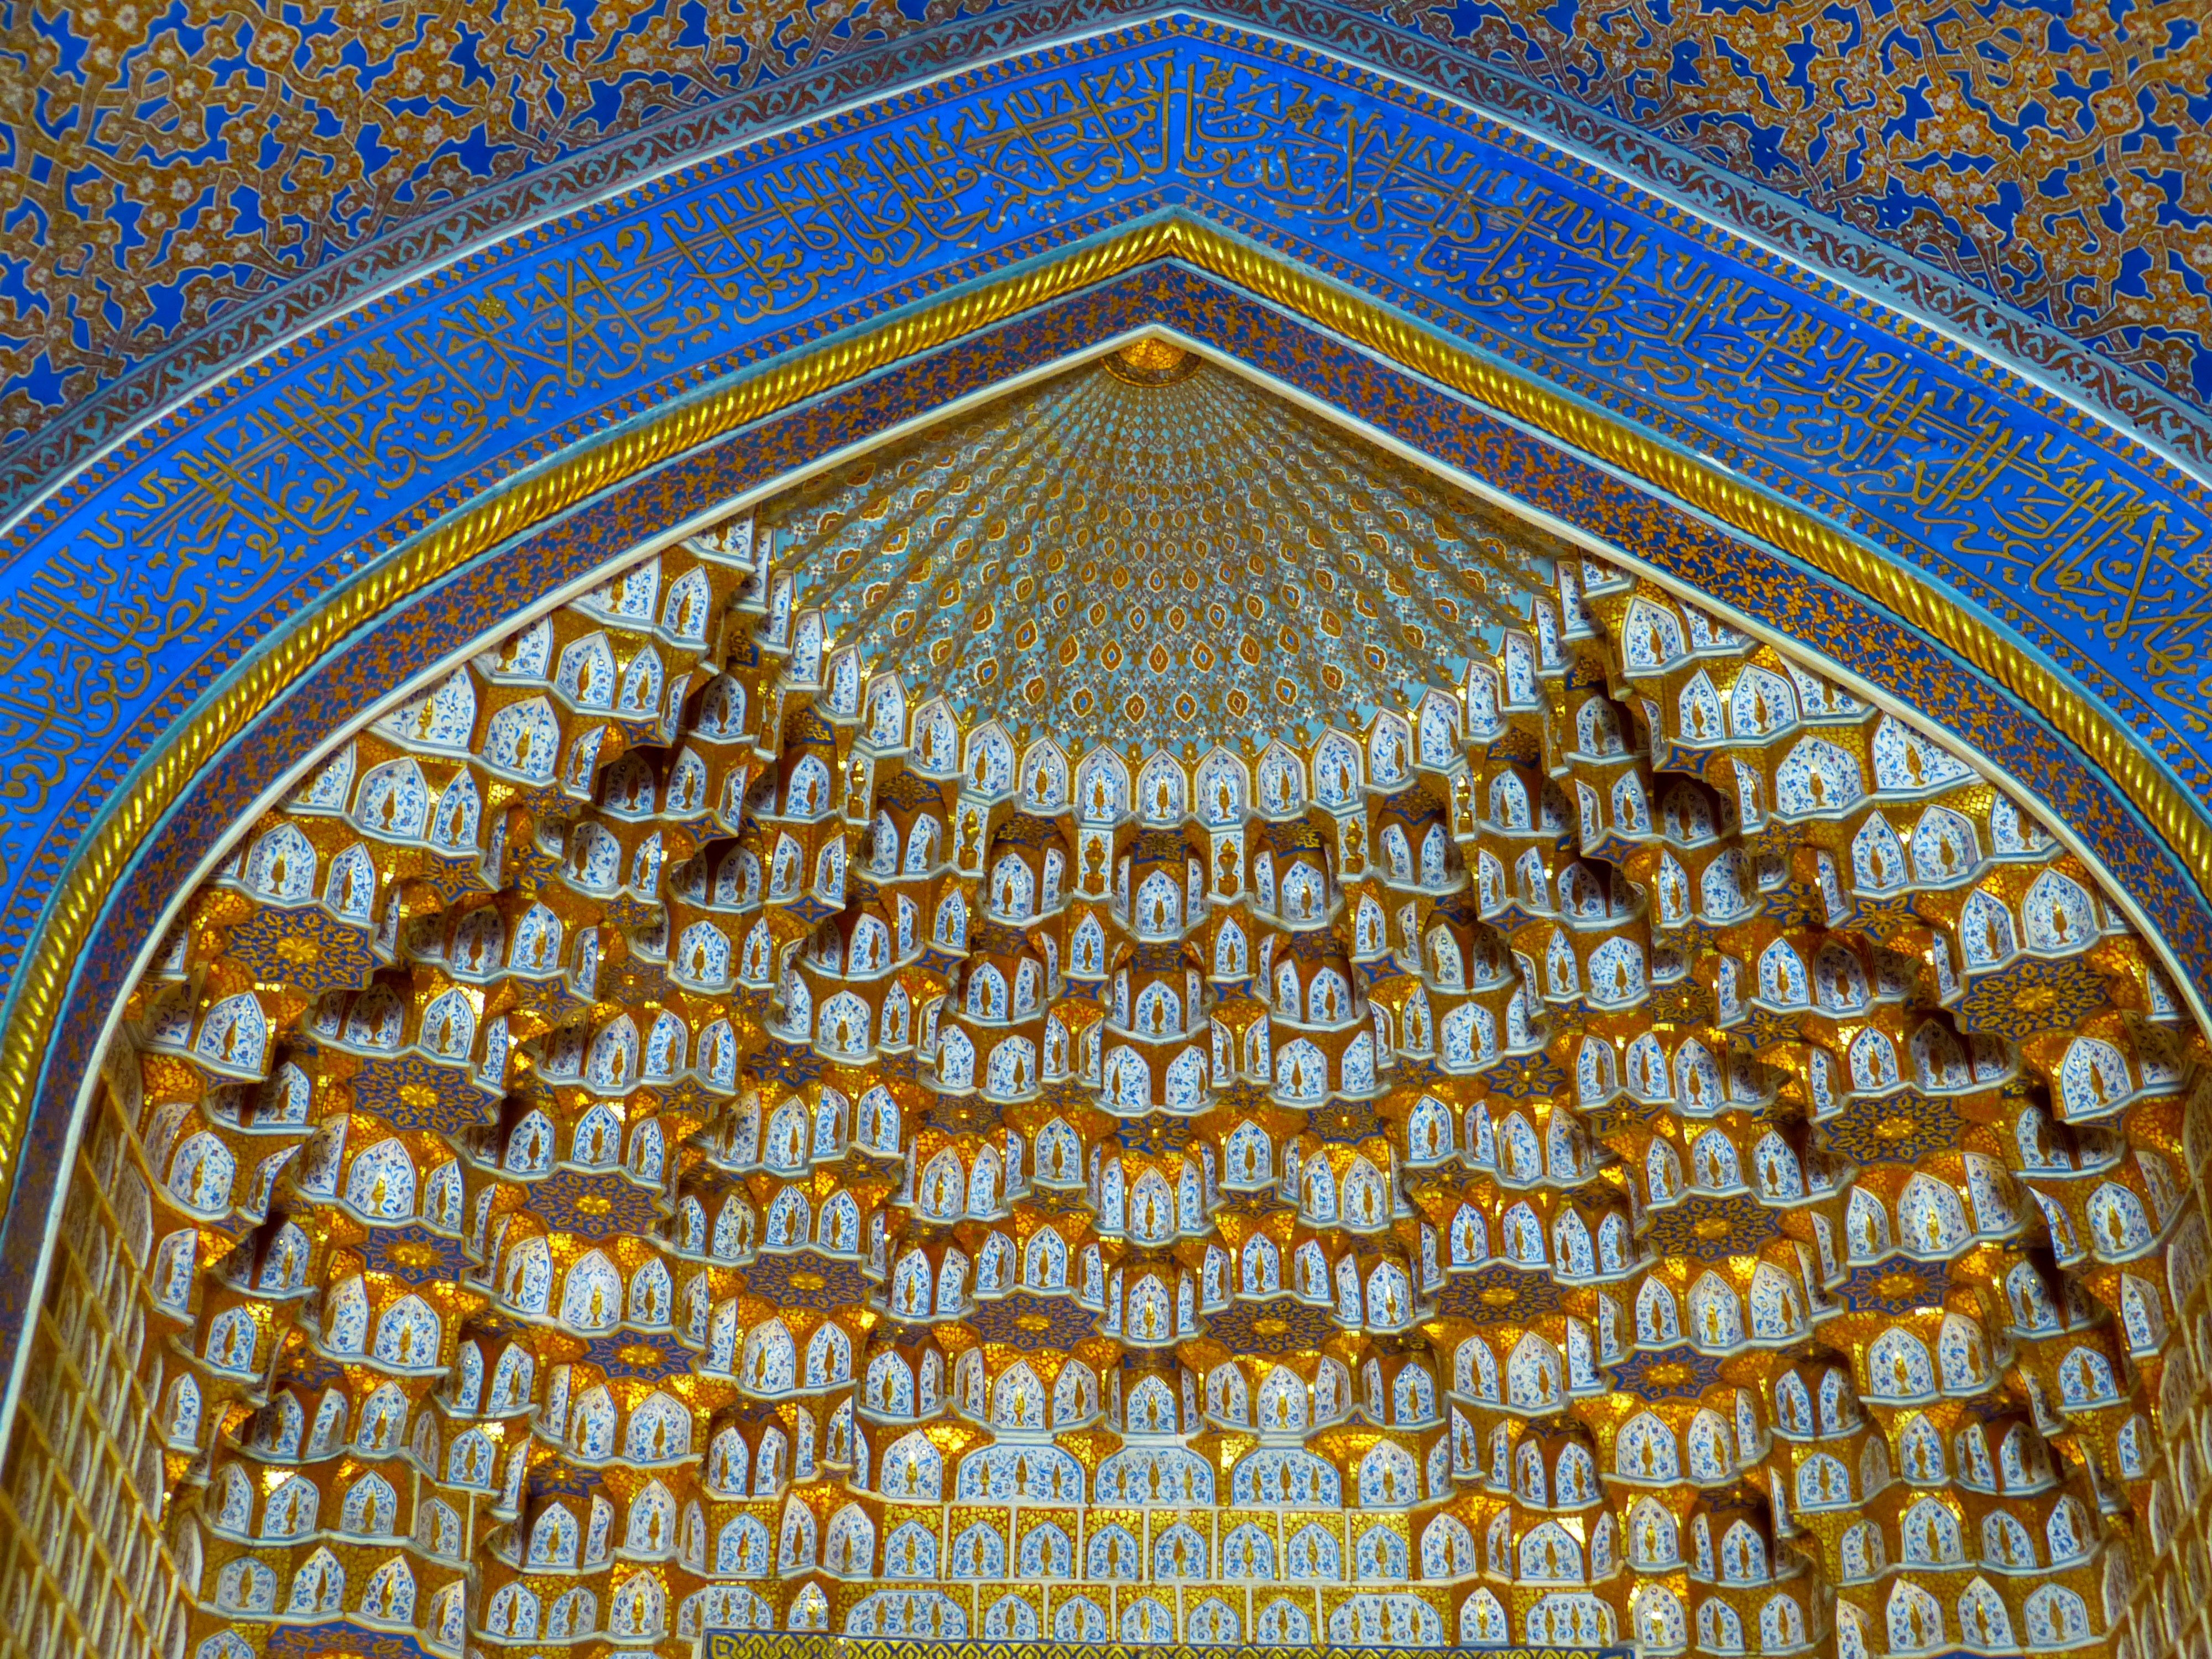 Detail of the Tillakori Medrese in Samarkand, an Islamic university from the 17th century. The building was long used as a mosque.